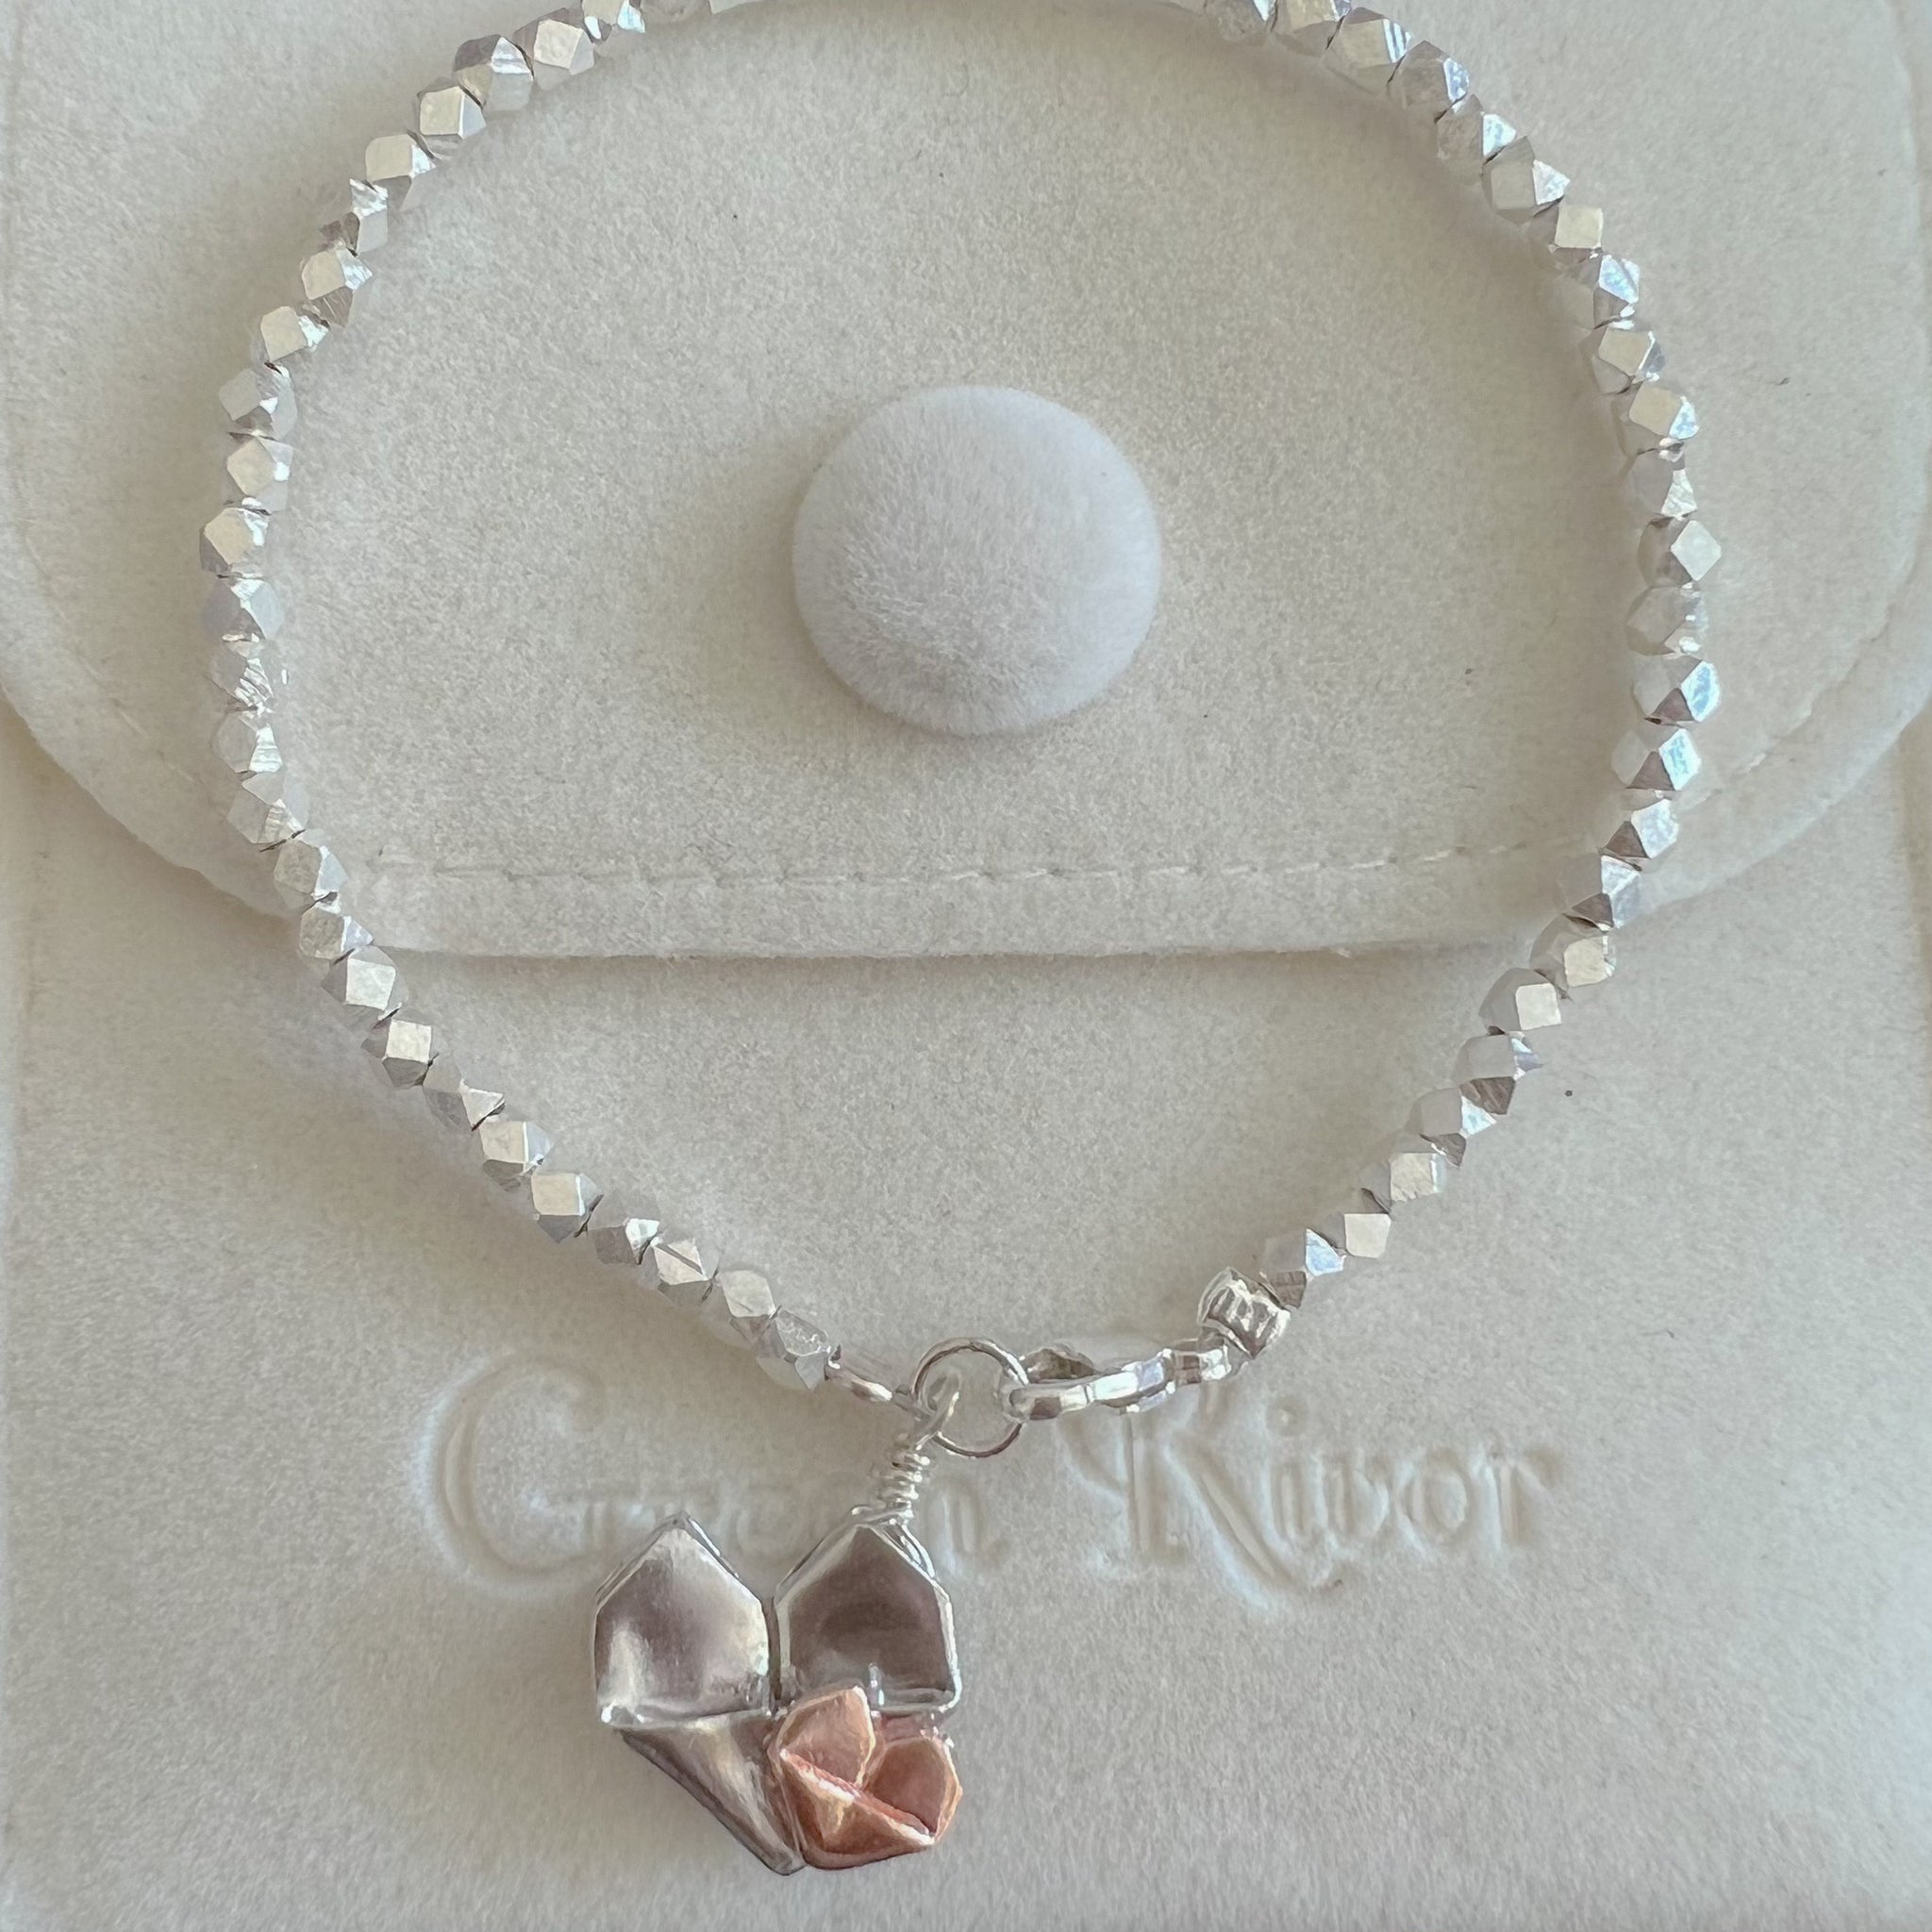 925 Silver Origami Big and Small Hearts Bracelet